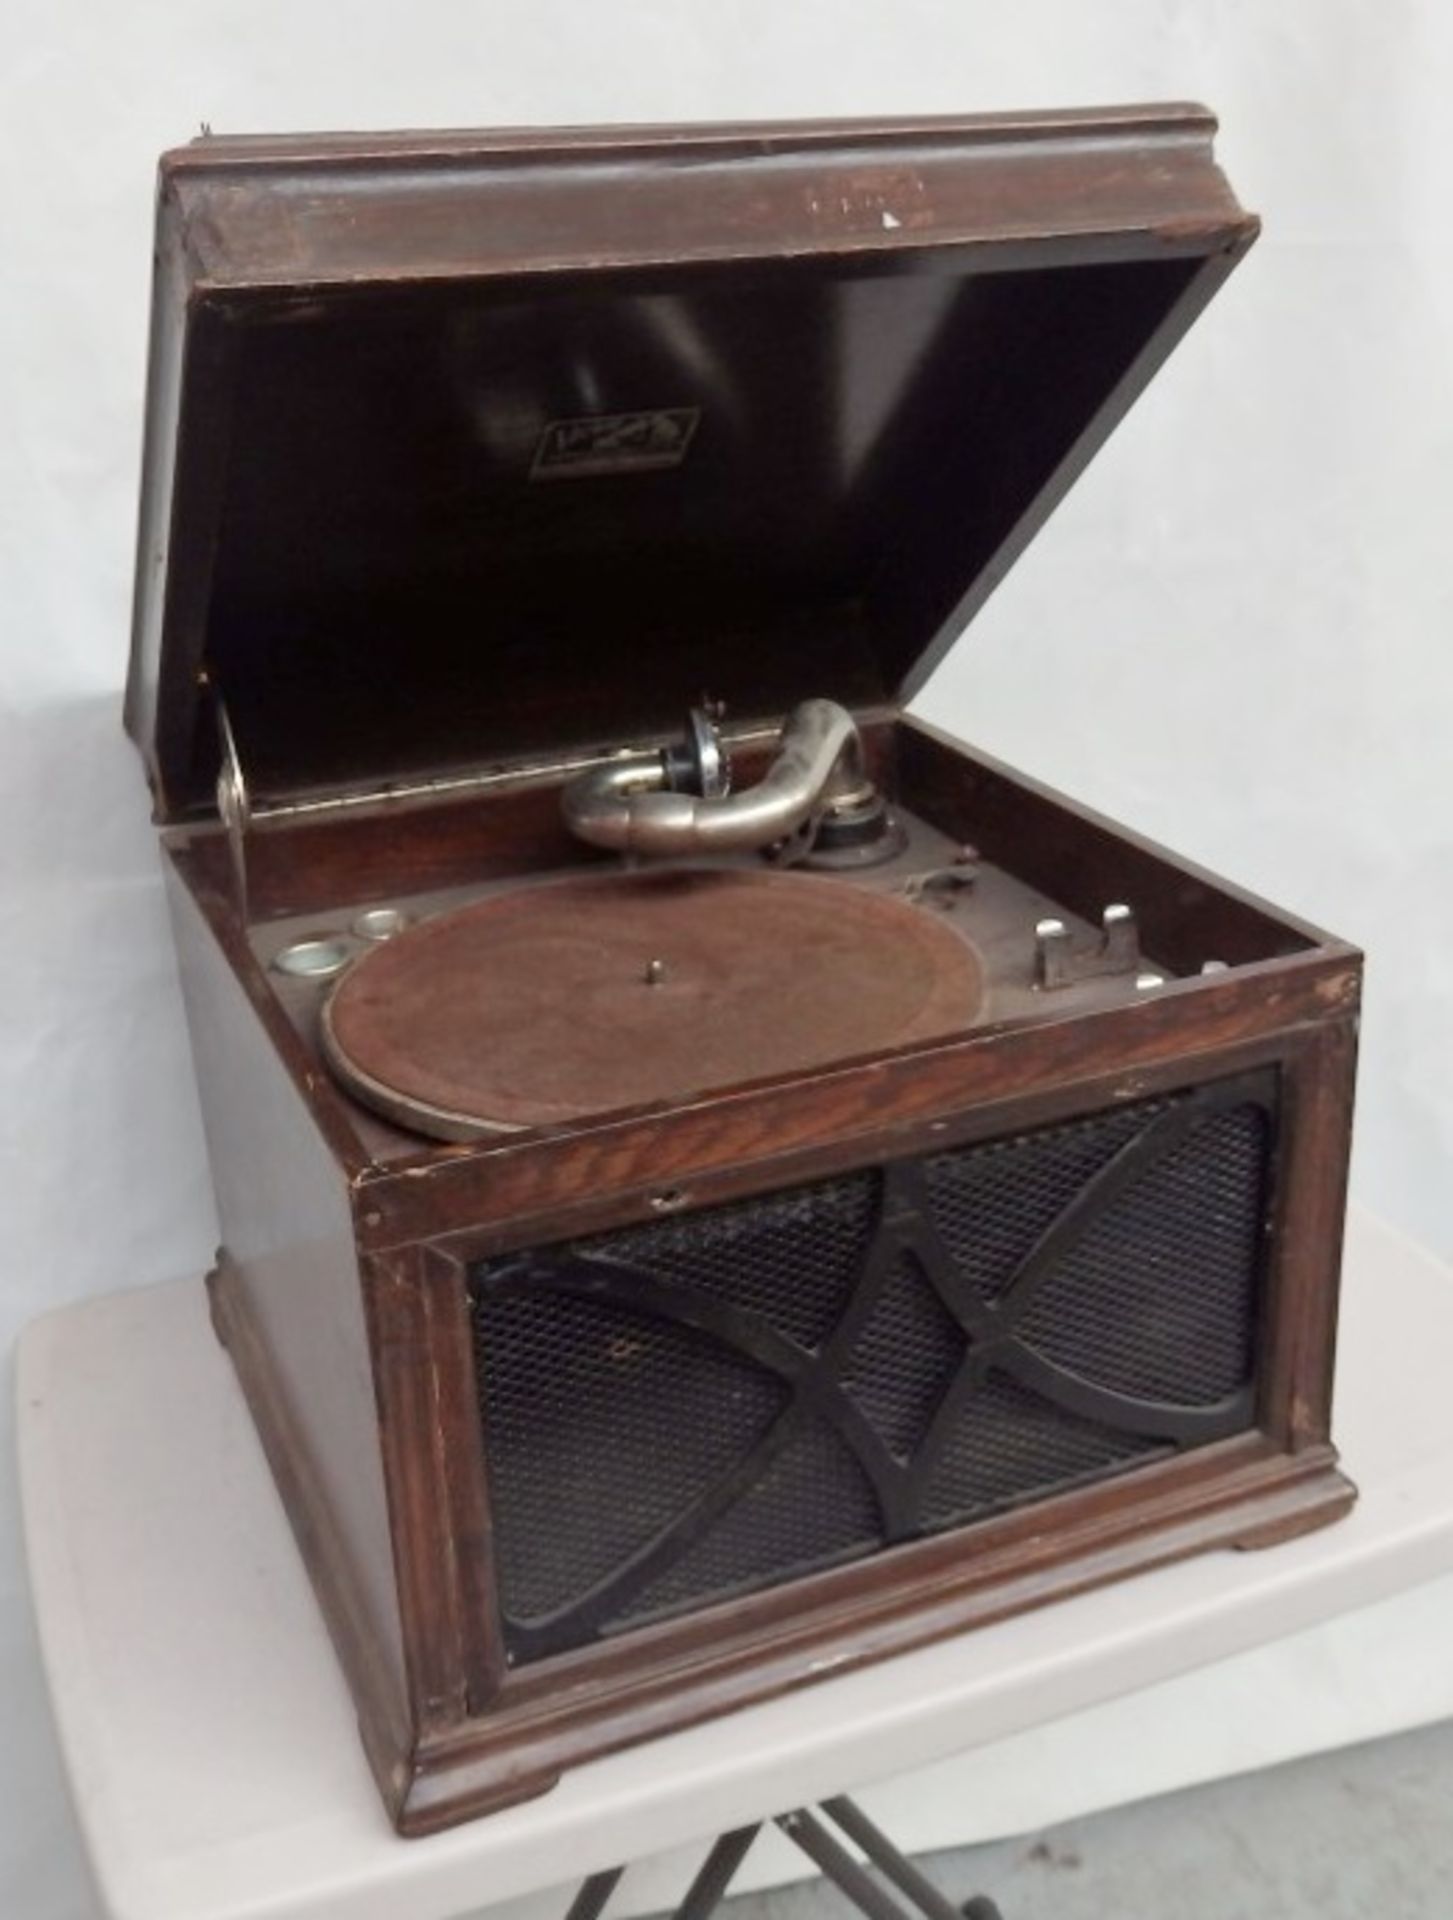 1 x Antique Victor Victrola "Talking Machine" Cabinet Gramophone (Circa 1917) - Crank Operated - - Image 2 of 6